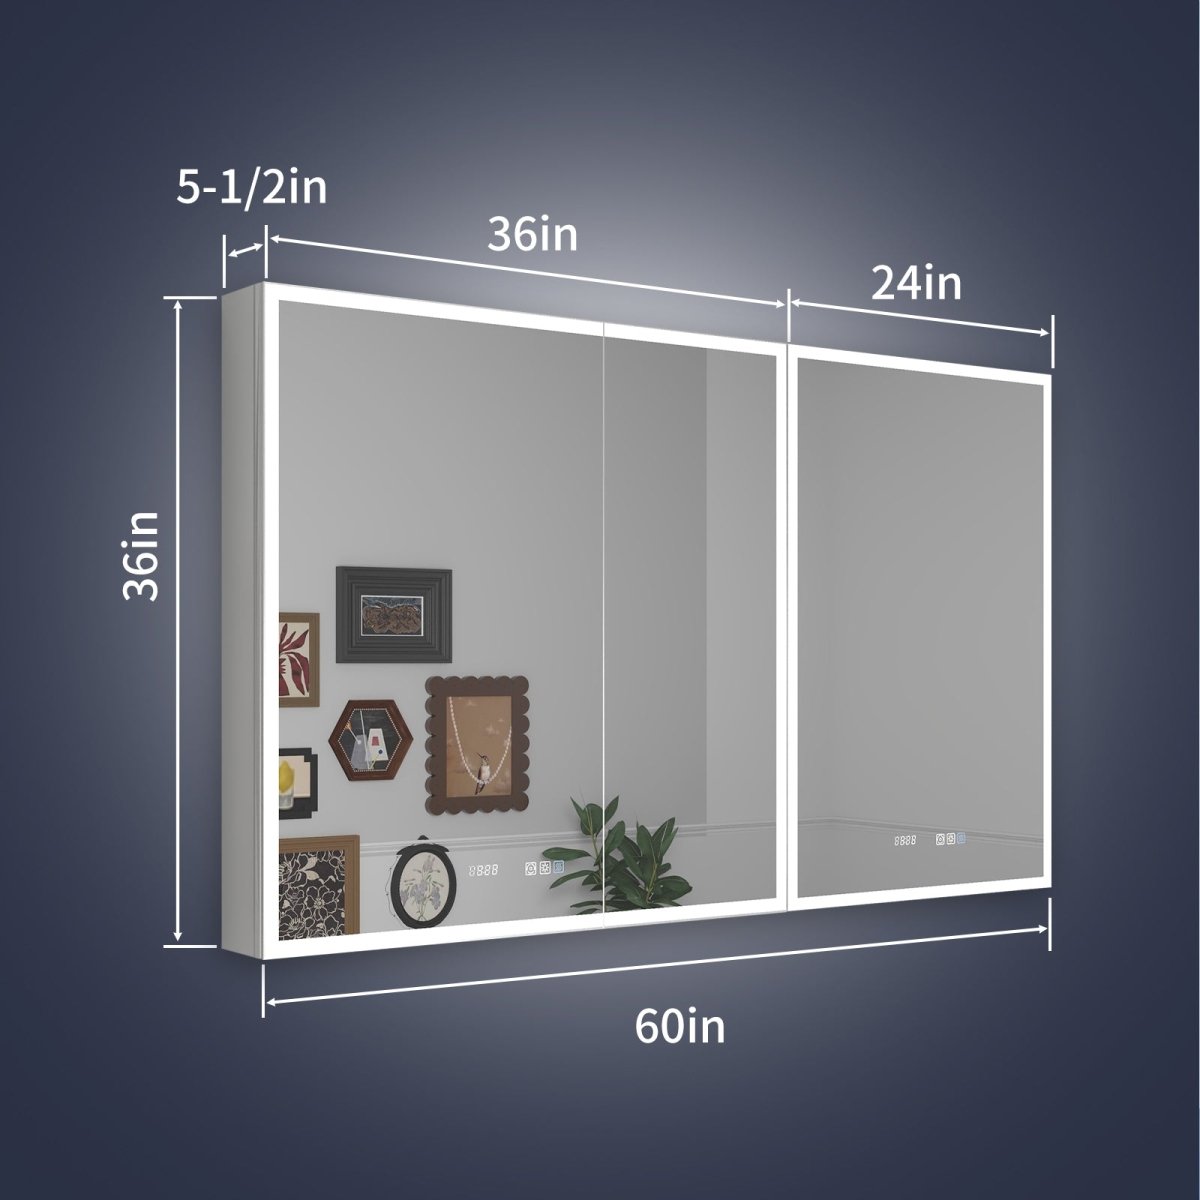 Rim 60" W x 36" H Led Lighted Medicine Cabinet Recessed or Surface with Mirrors and Clock